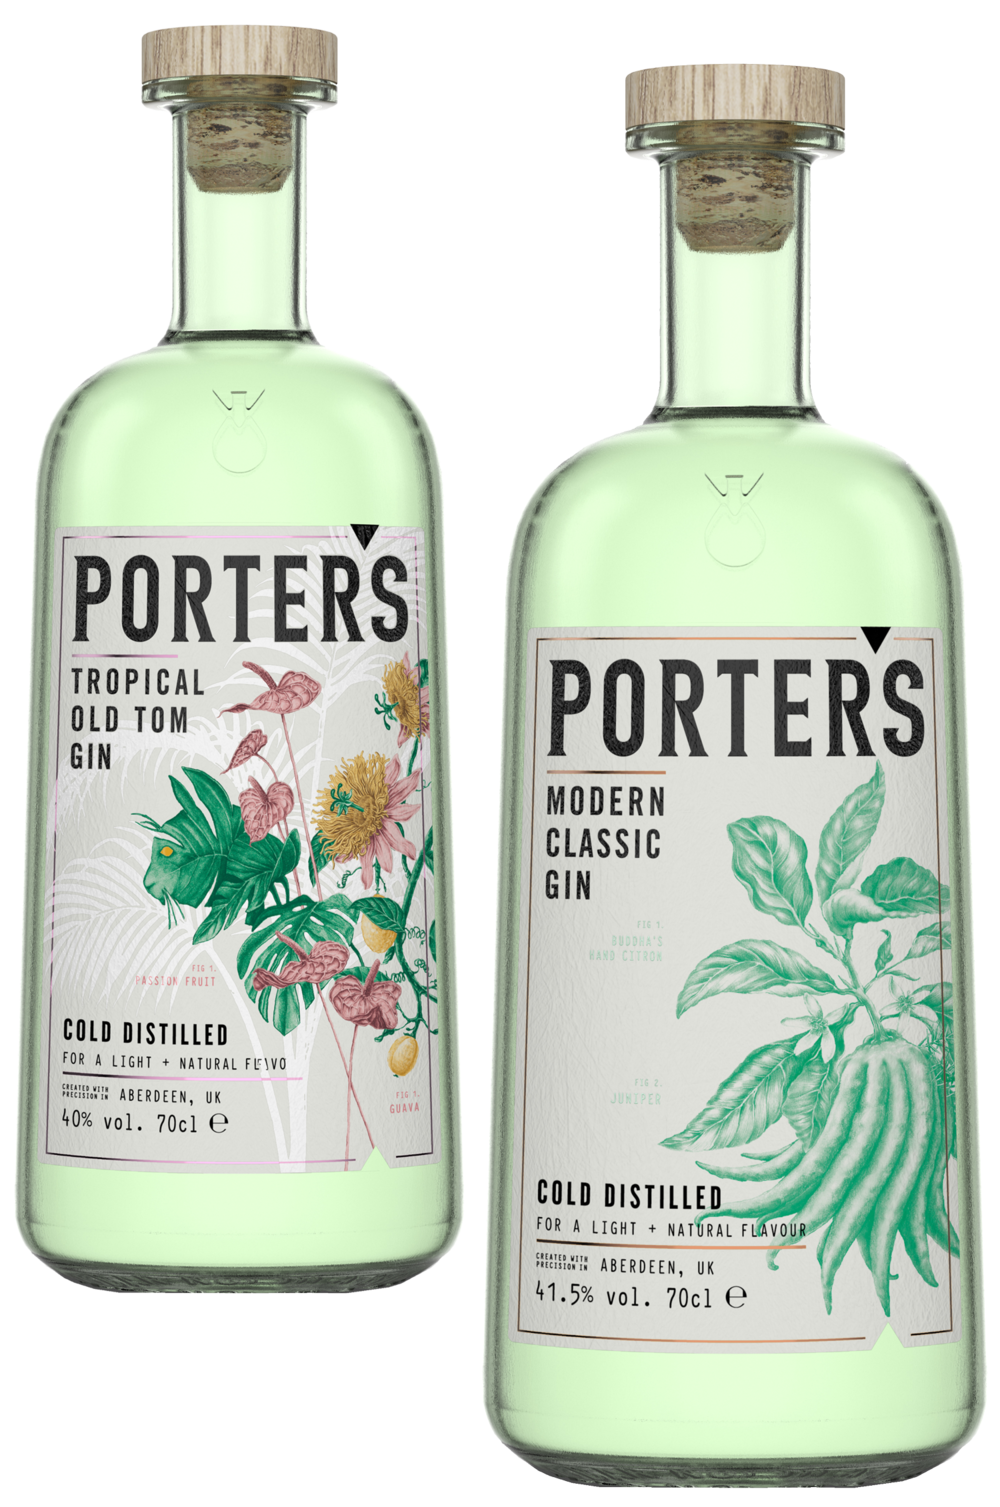 porters gin - modern classic & tropical old tom